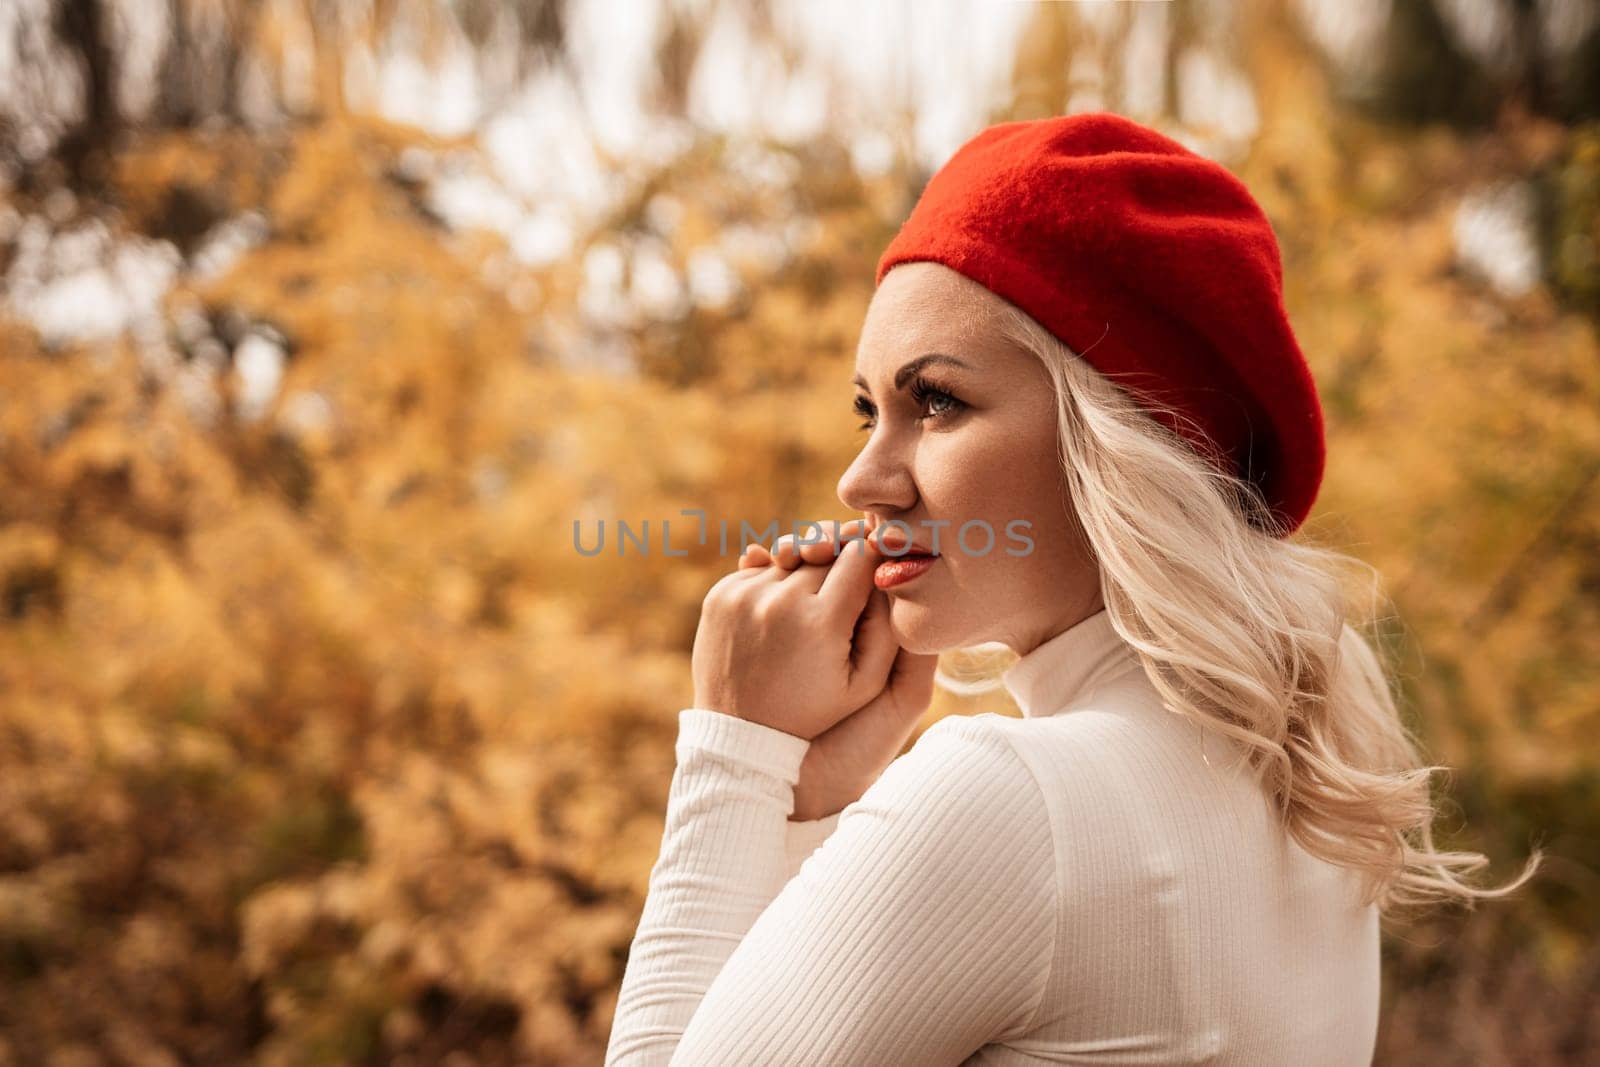 A blonde woman wearing a red hat and a white shirt is standing in a forest. She is looking at the camera with a serious expression